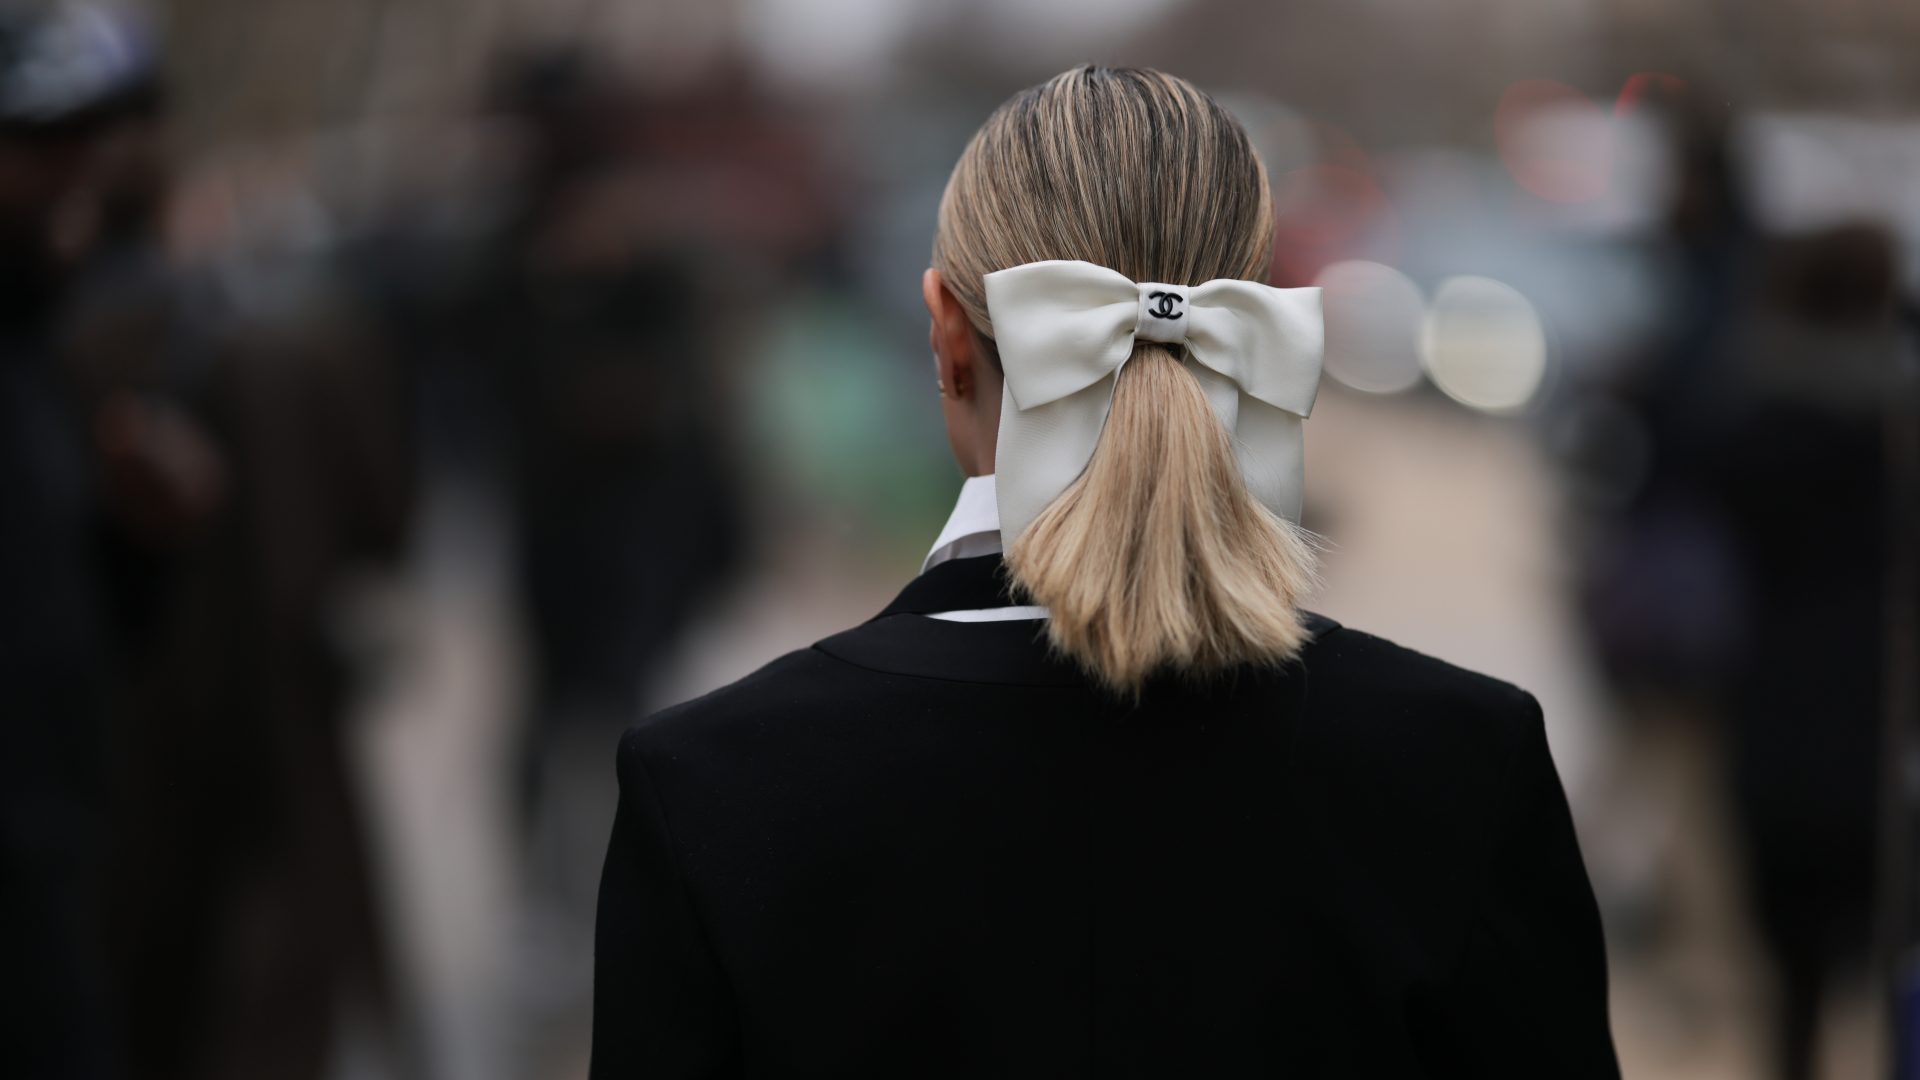 Hair bows are this season's must-have accessory